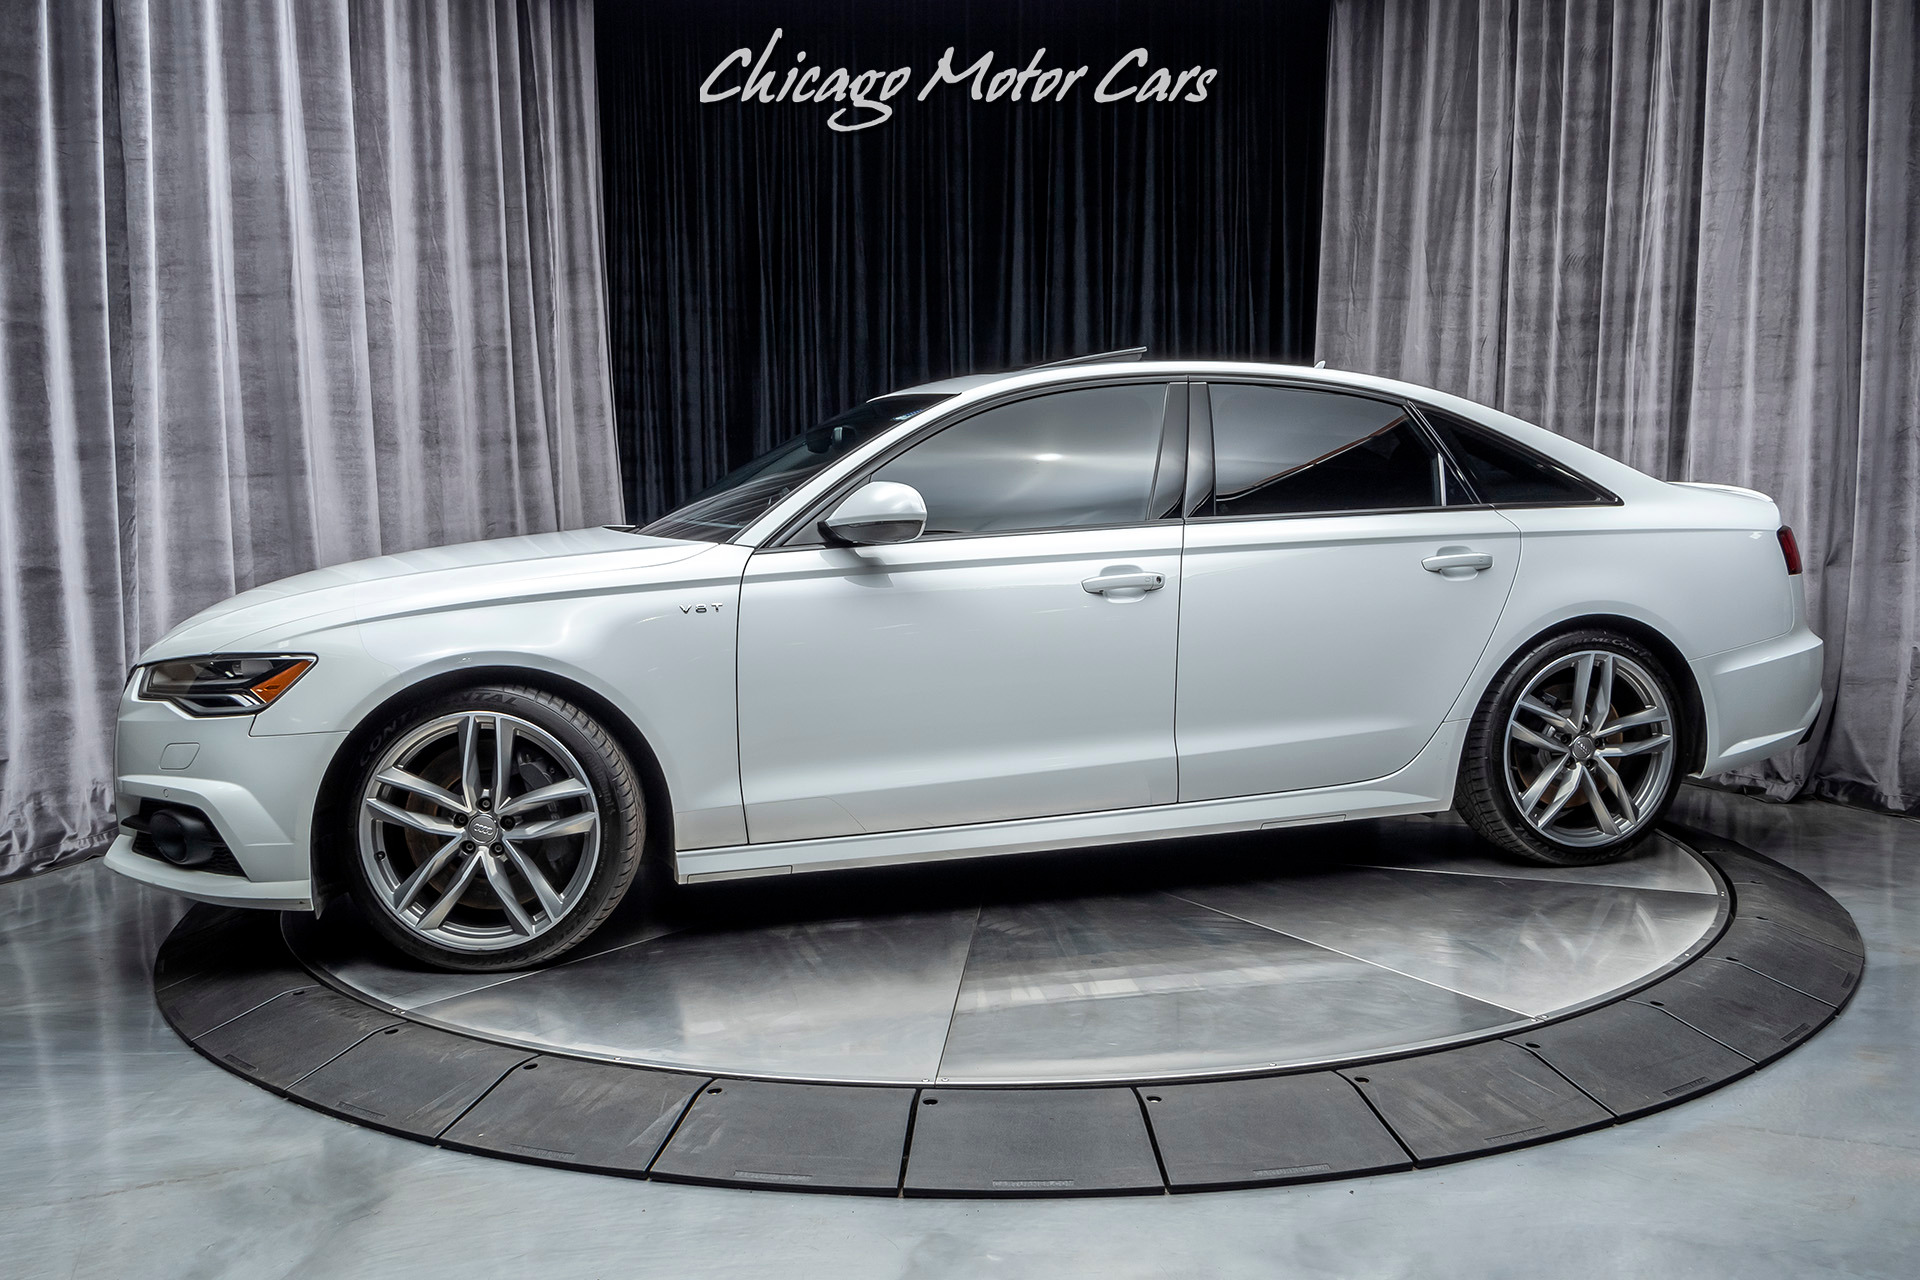 Used 2016 Audi S6 4.0T quattro Premium Plus Sedan MSRP $83K+ FULL BOLT ON  UPGRADES! 600WHP! For Sale (Special Pricing) | Chicago Motor Cars Stock  #16812